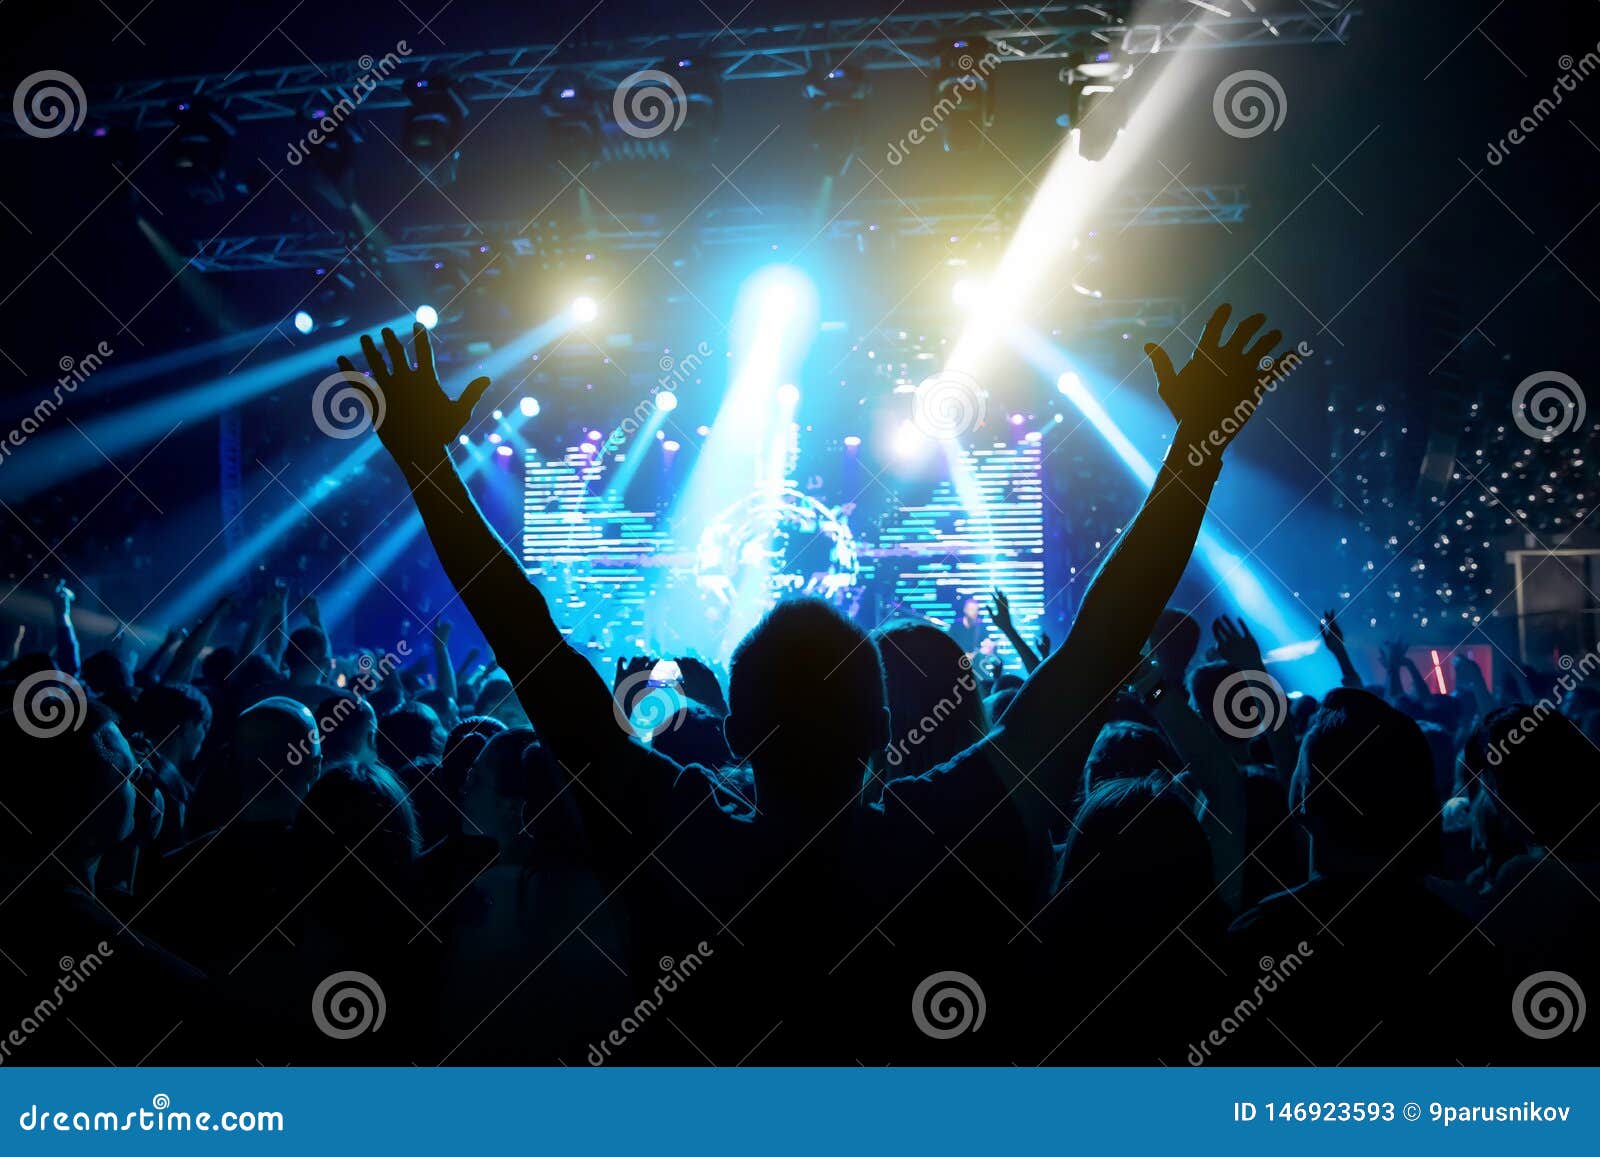 Silhouette of Man with Raised Hands on Music Concert Editorial Stock ...